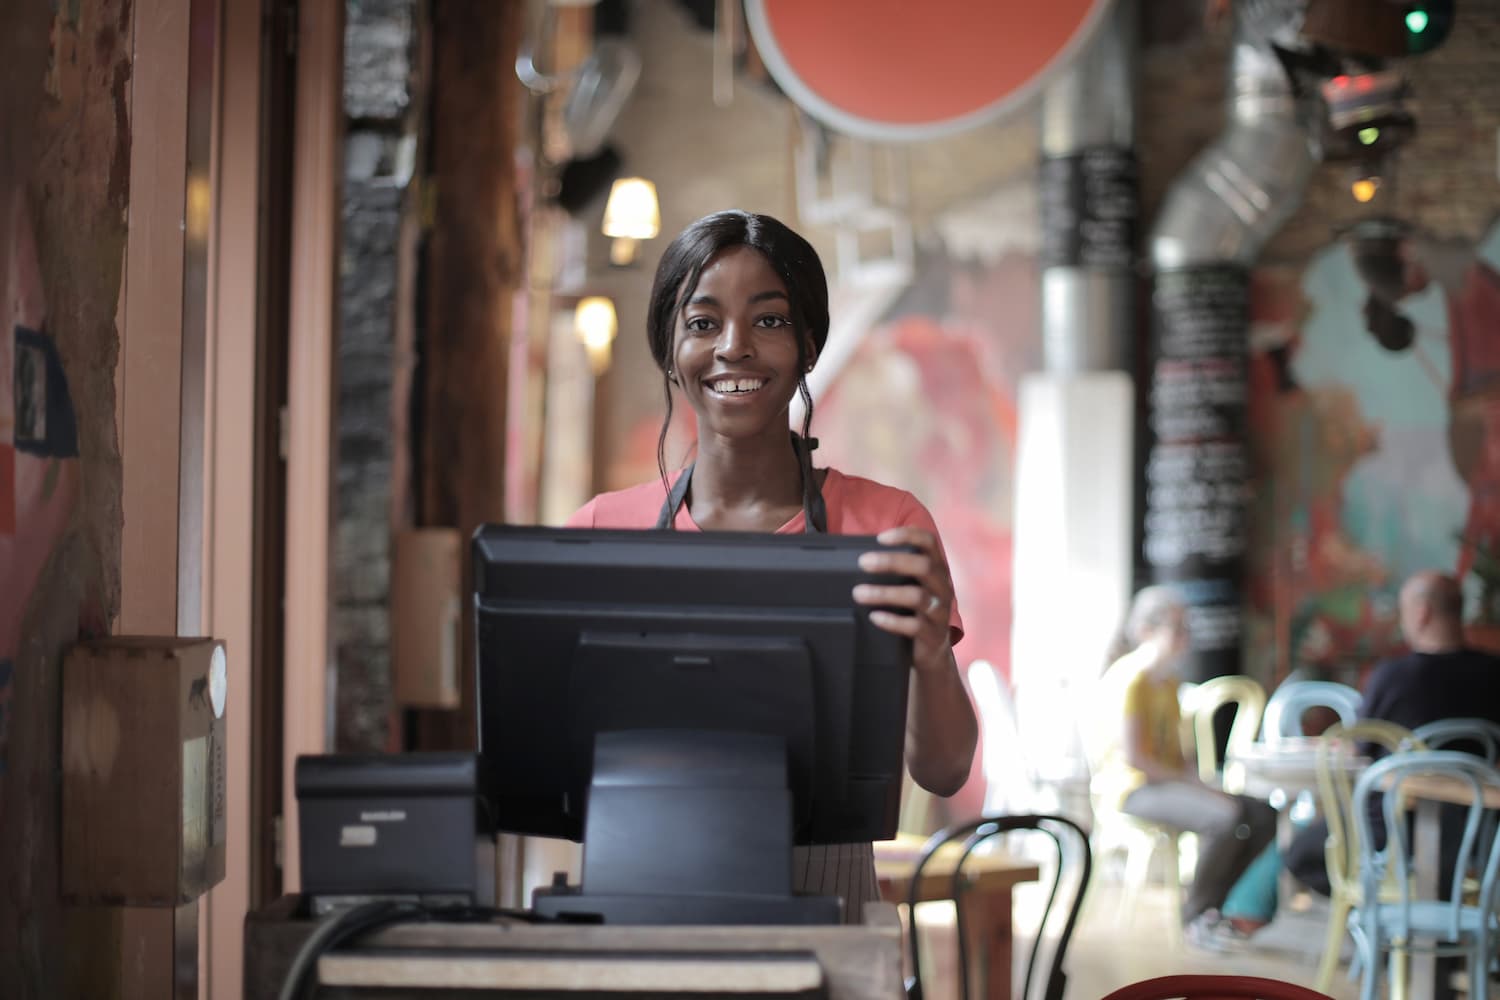  Young woman working the cash register